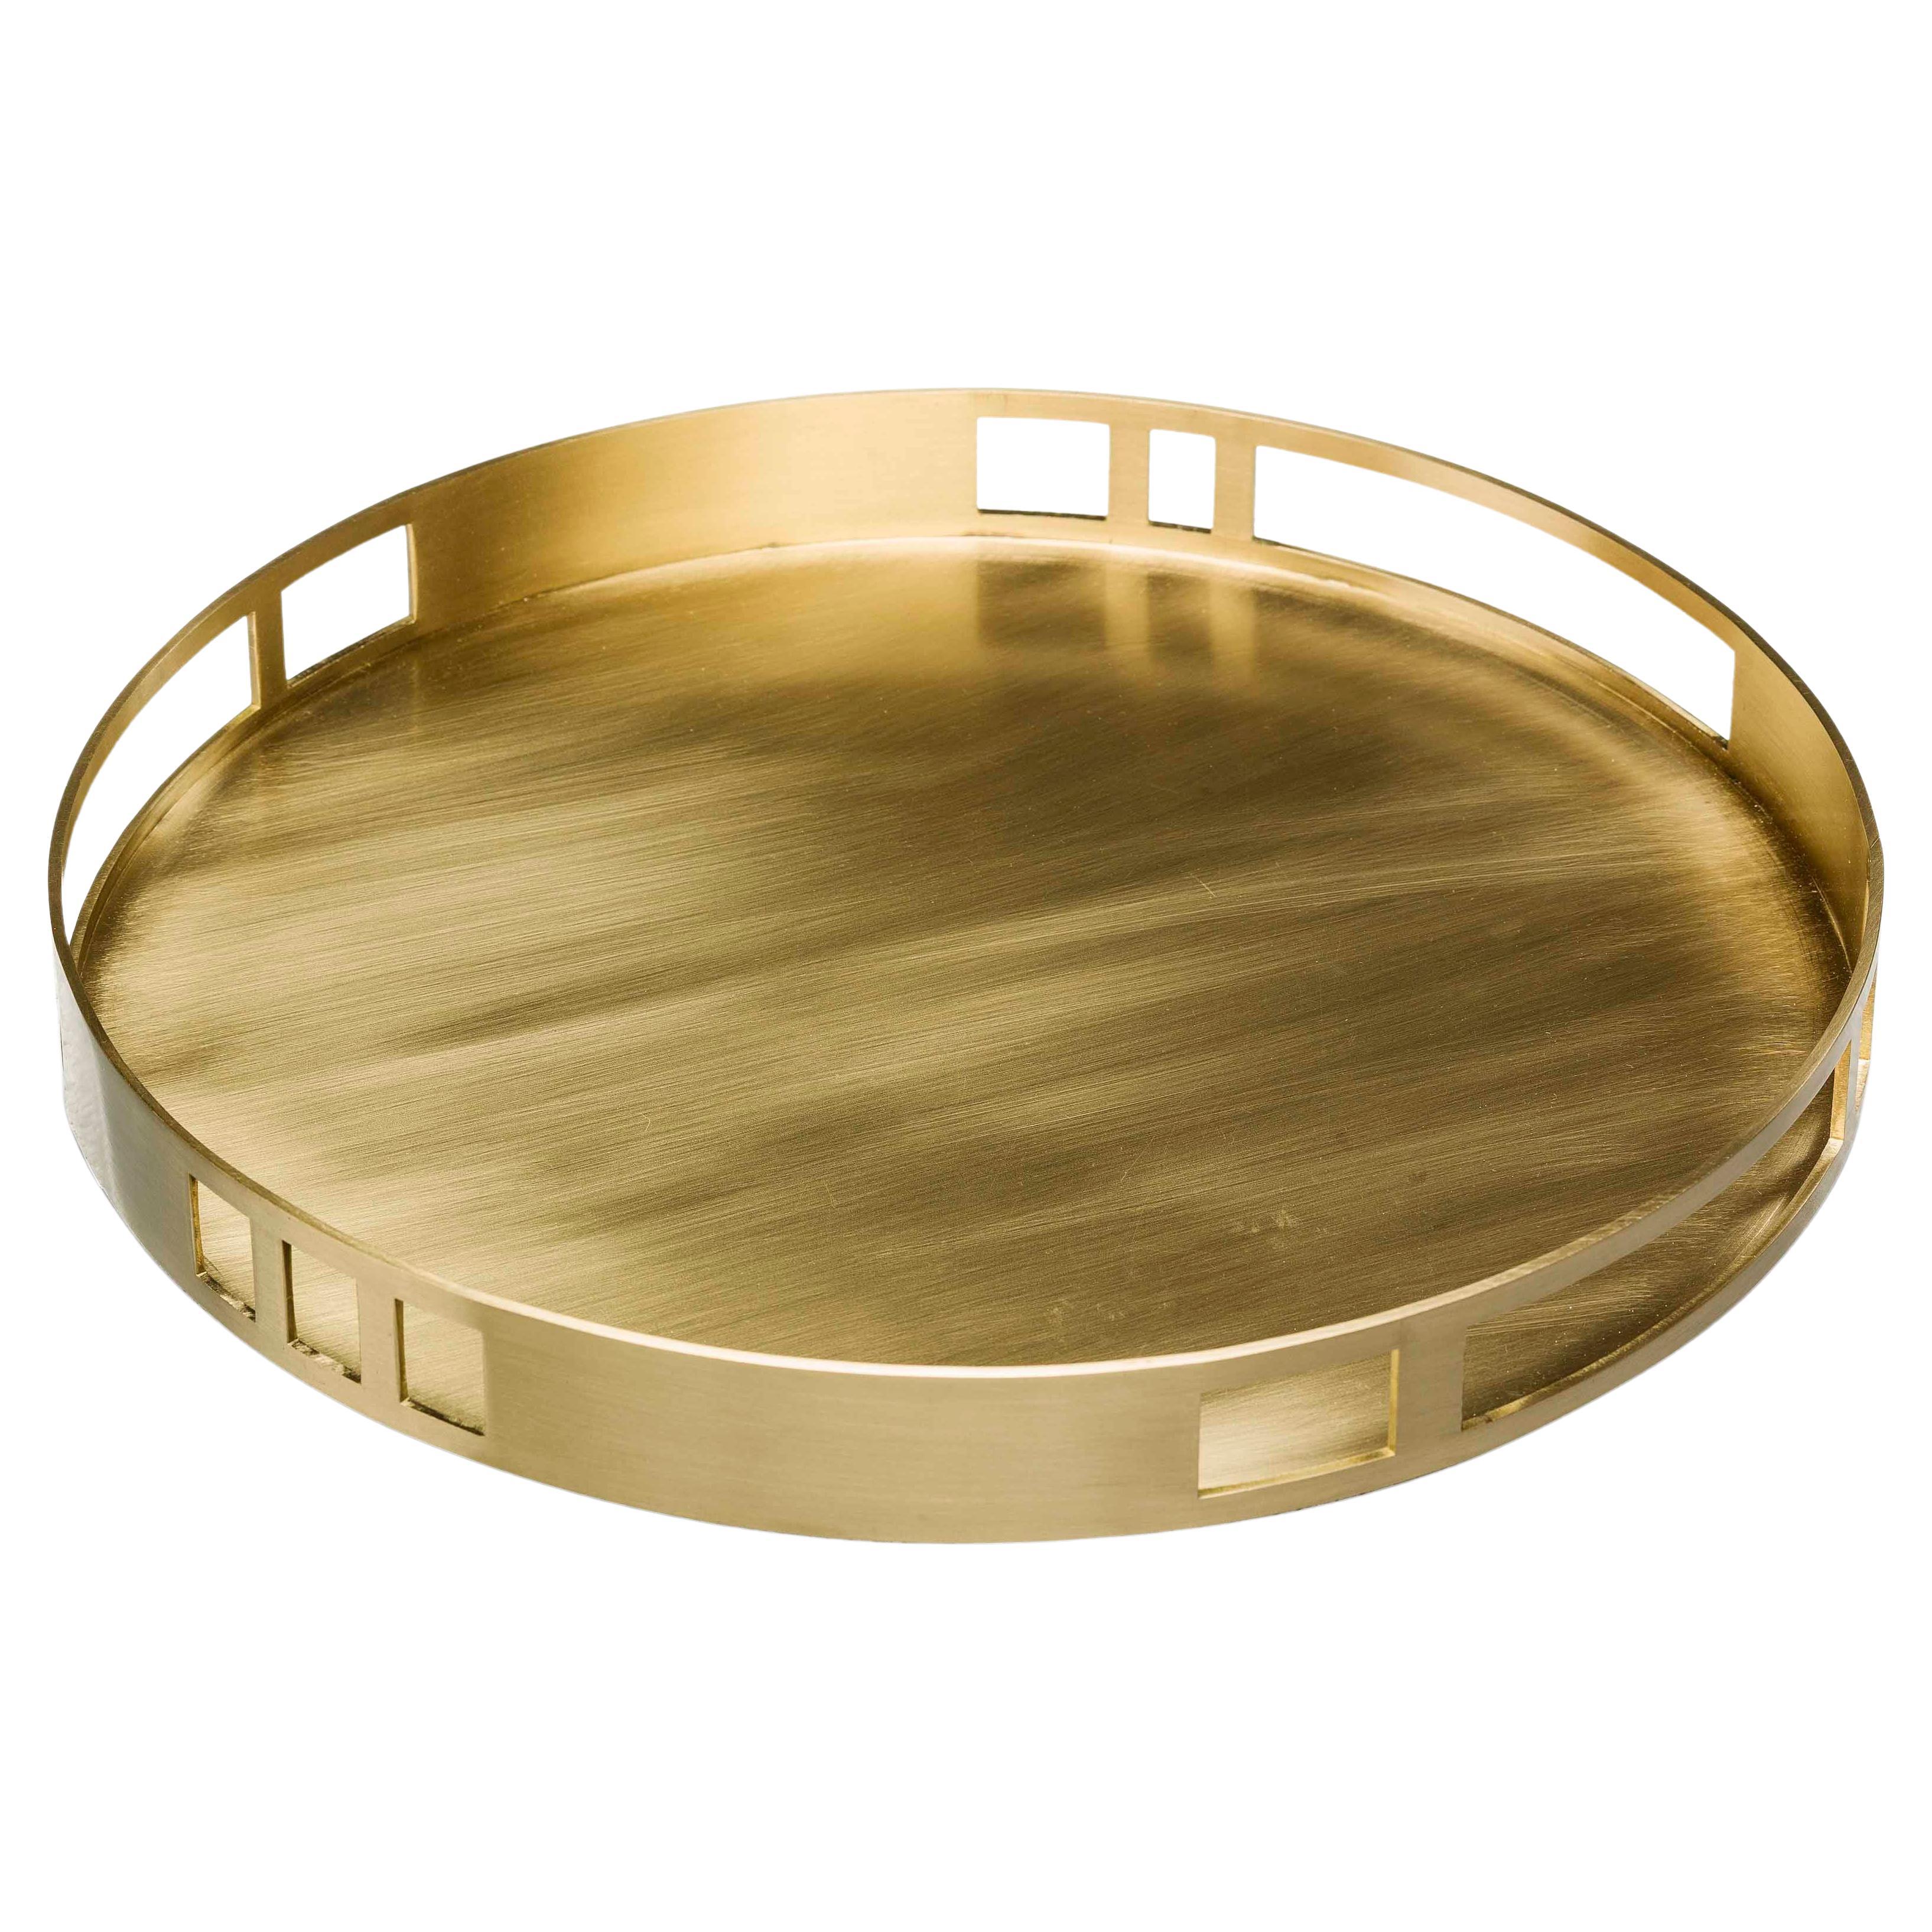 Escape Tray, in Brushed Brass, Handcrafted in Portugal by Duistt